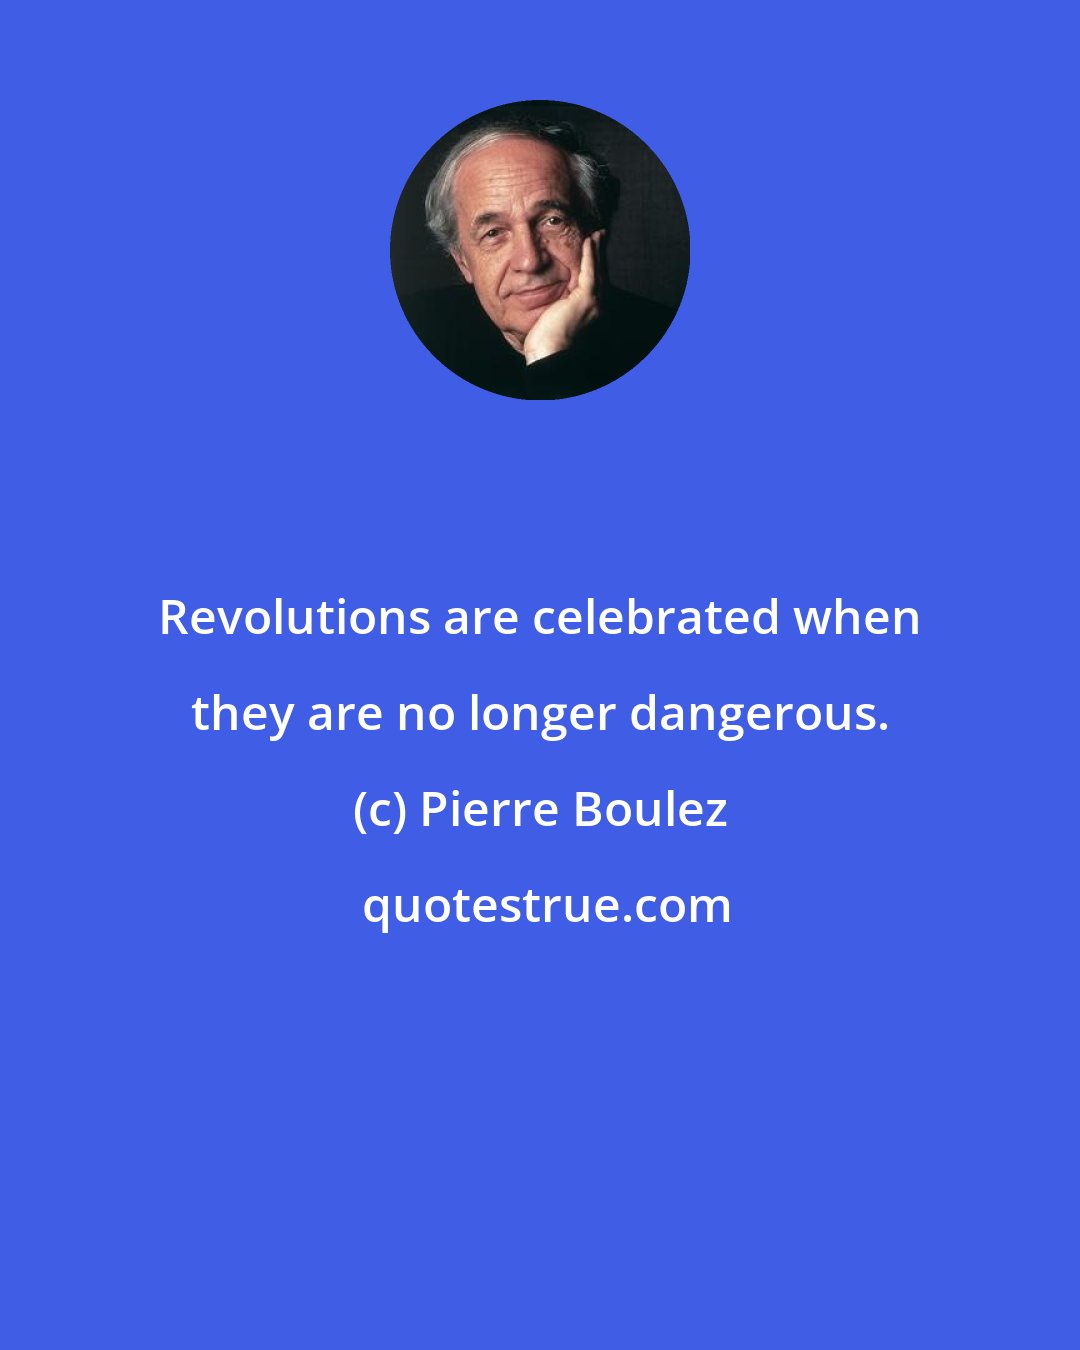 Pierre Boulez: Revolutions are celebrated when they are no longer dangerous.